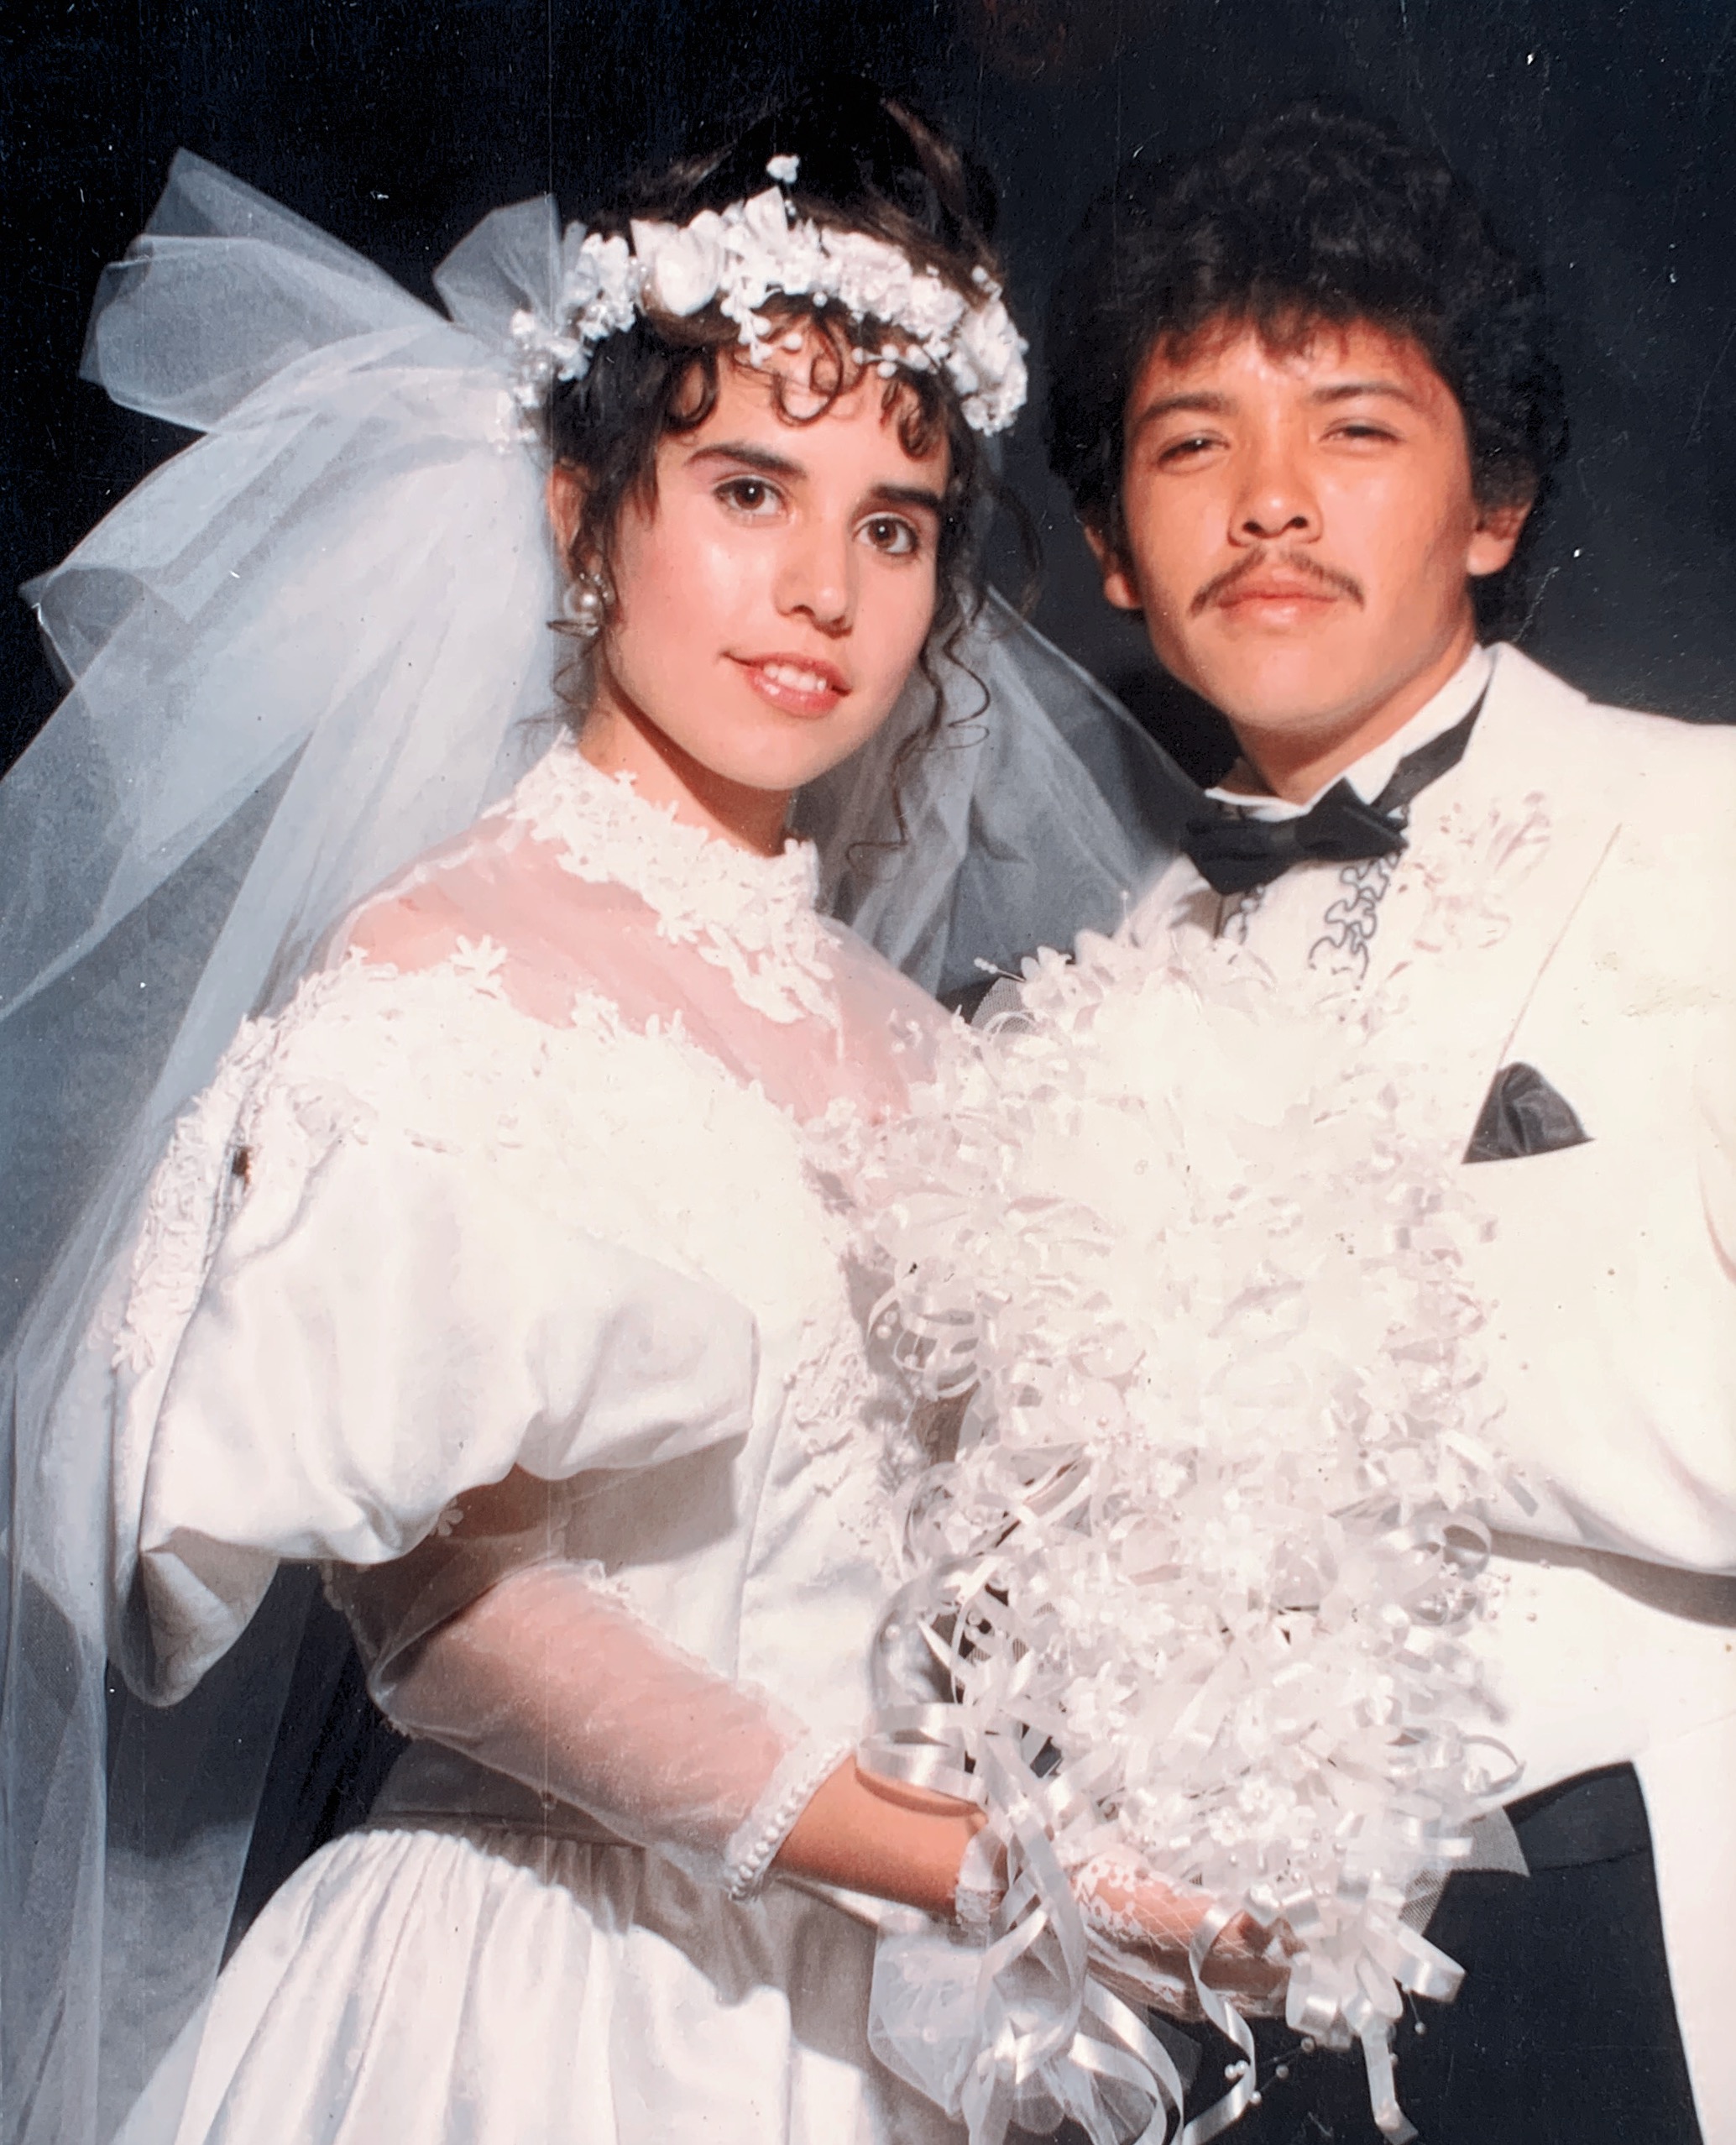 Our wedding on December 27, 1986